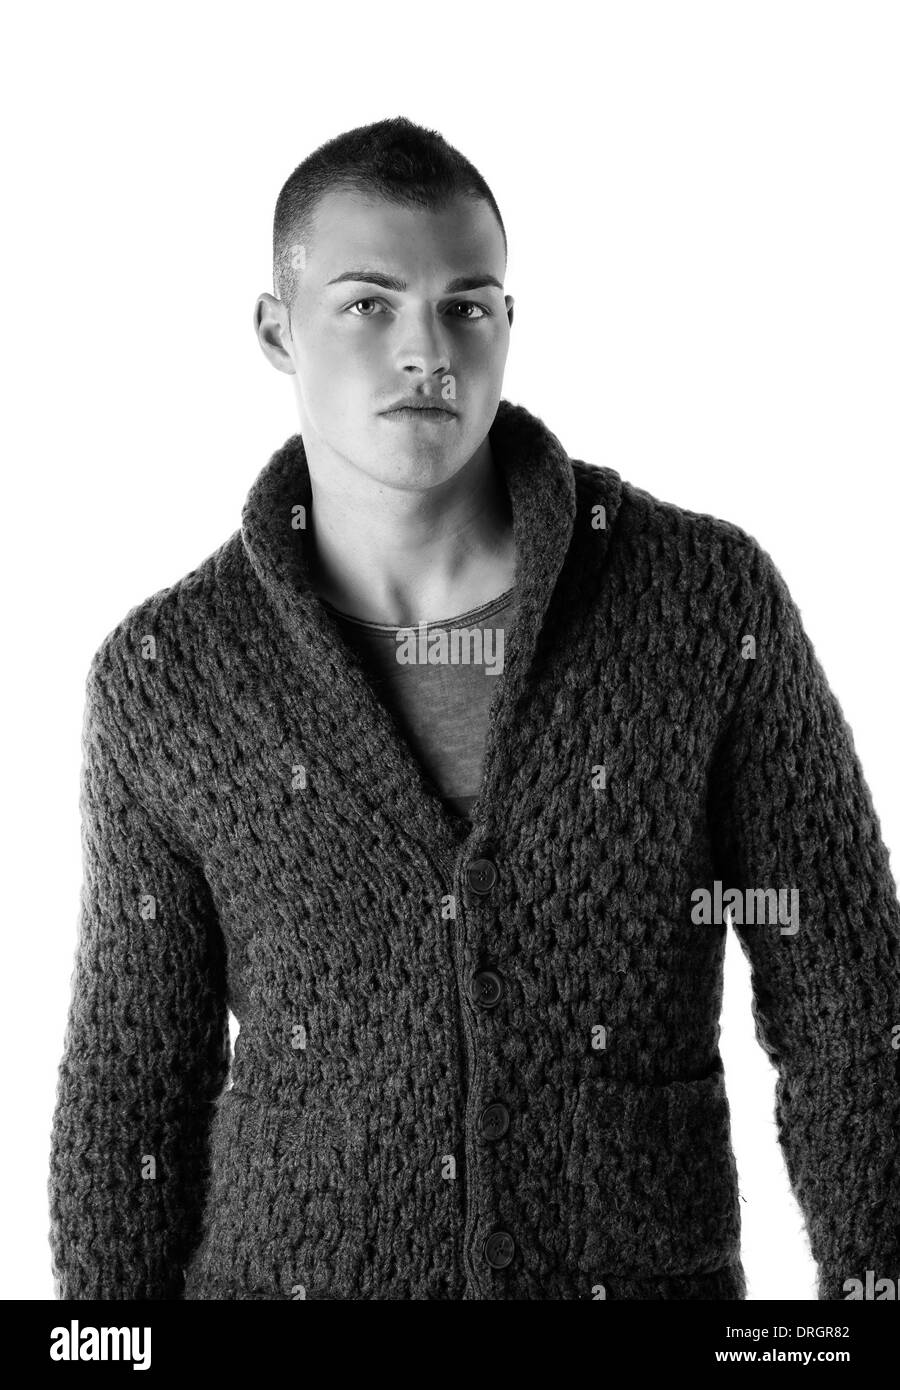 Attractive young man with wool sweater, isolated on white background Stock Photo